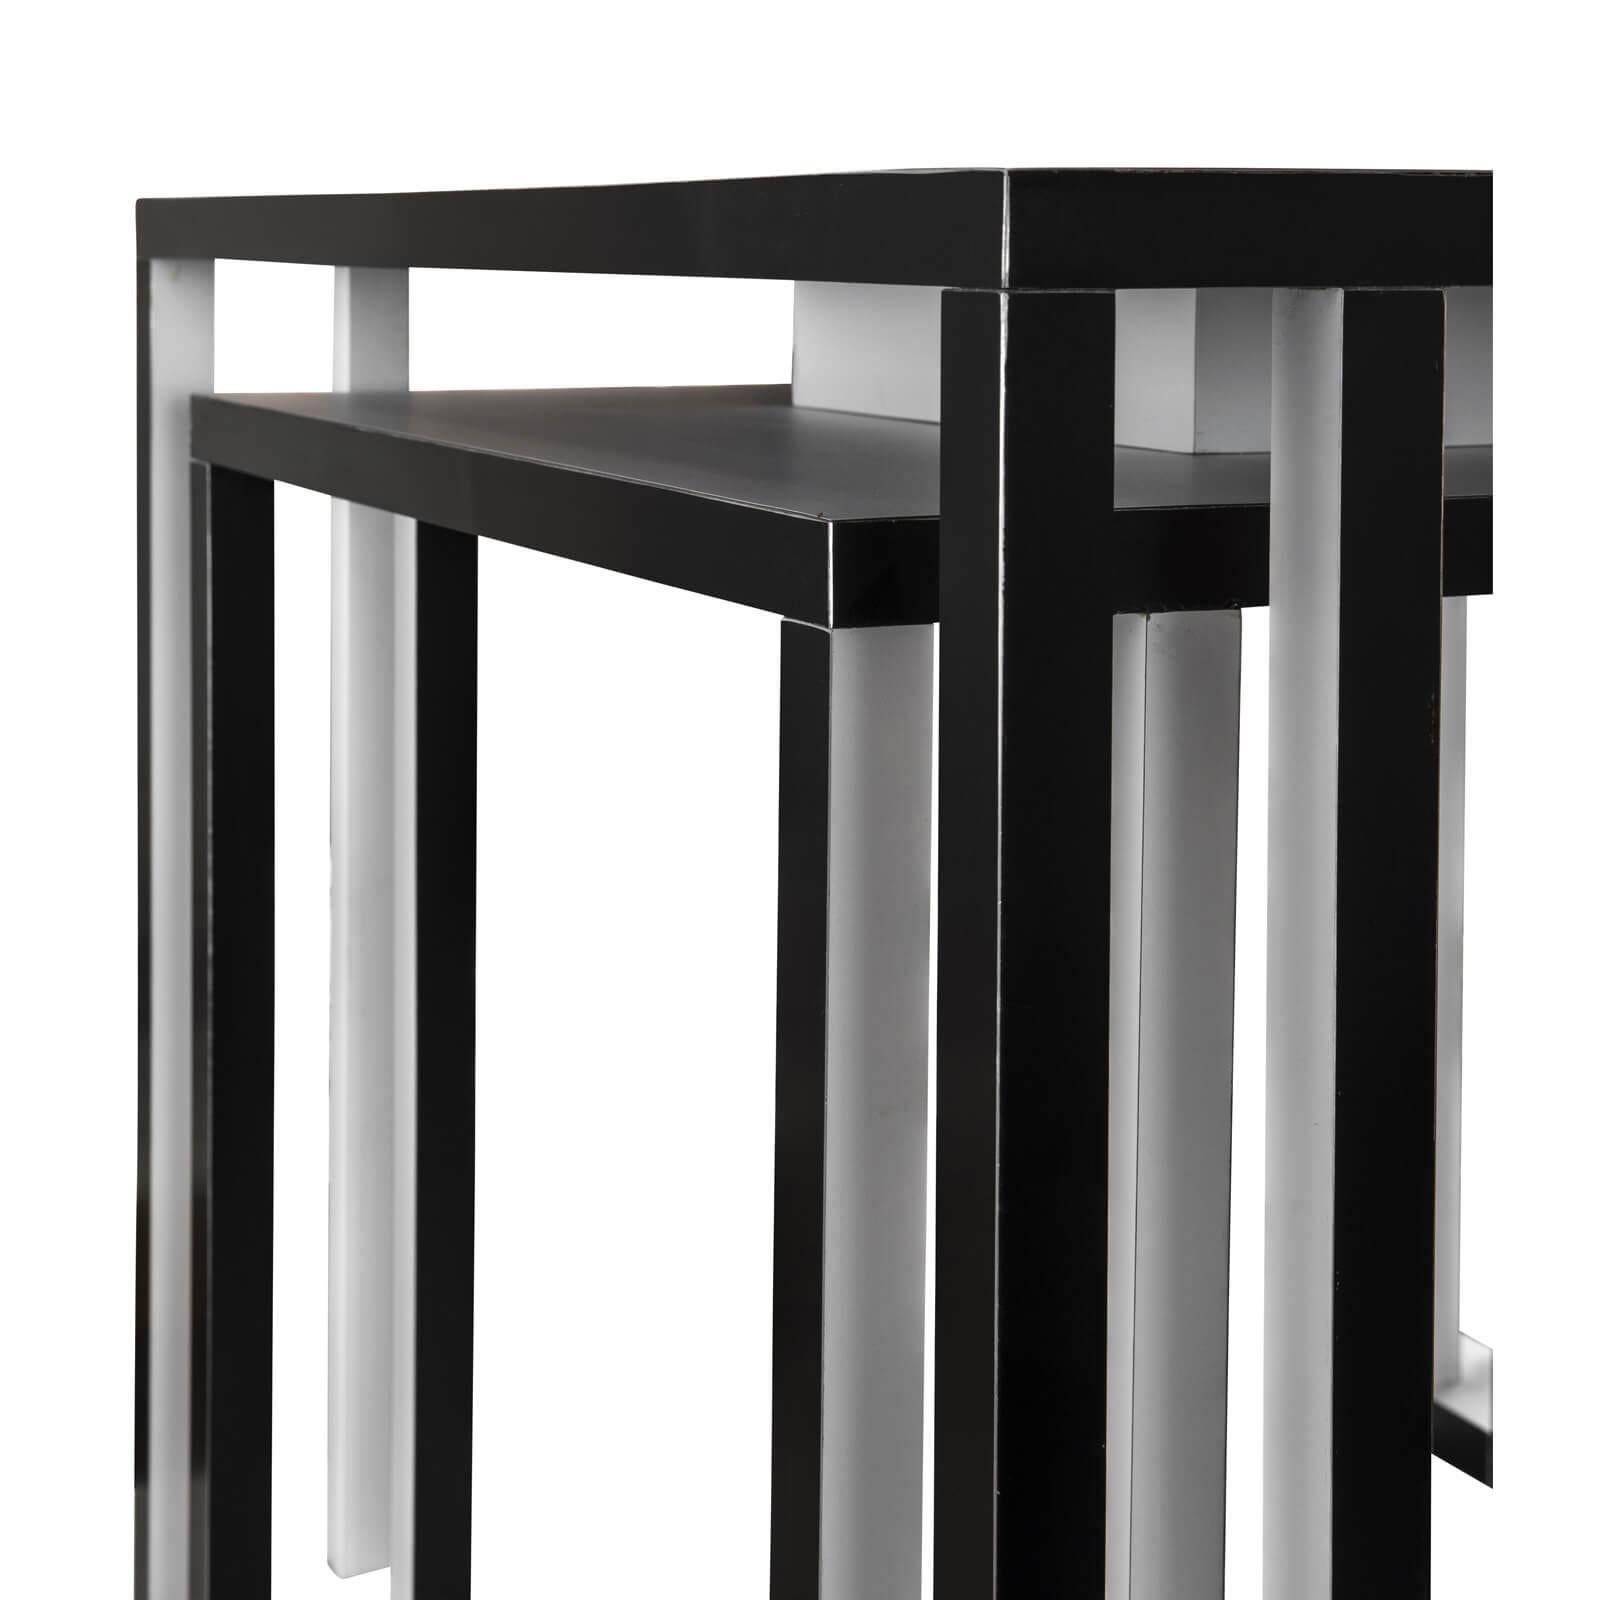 Unique Center Table. Aluminum Frame featuring a perfect blend of White & Black. Bespoke sizes available upon request